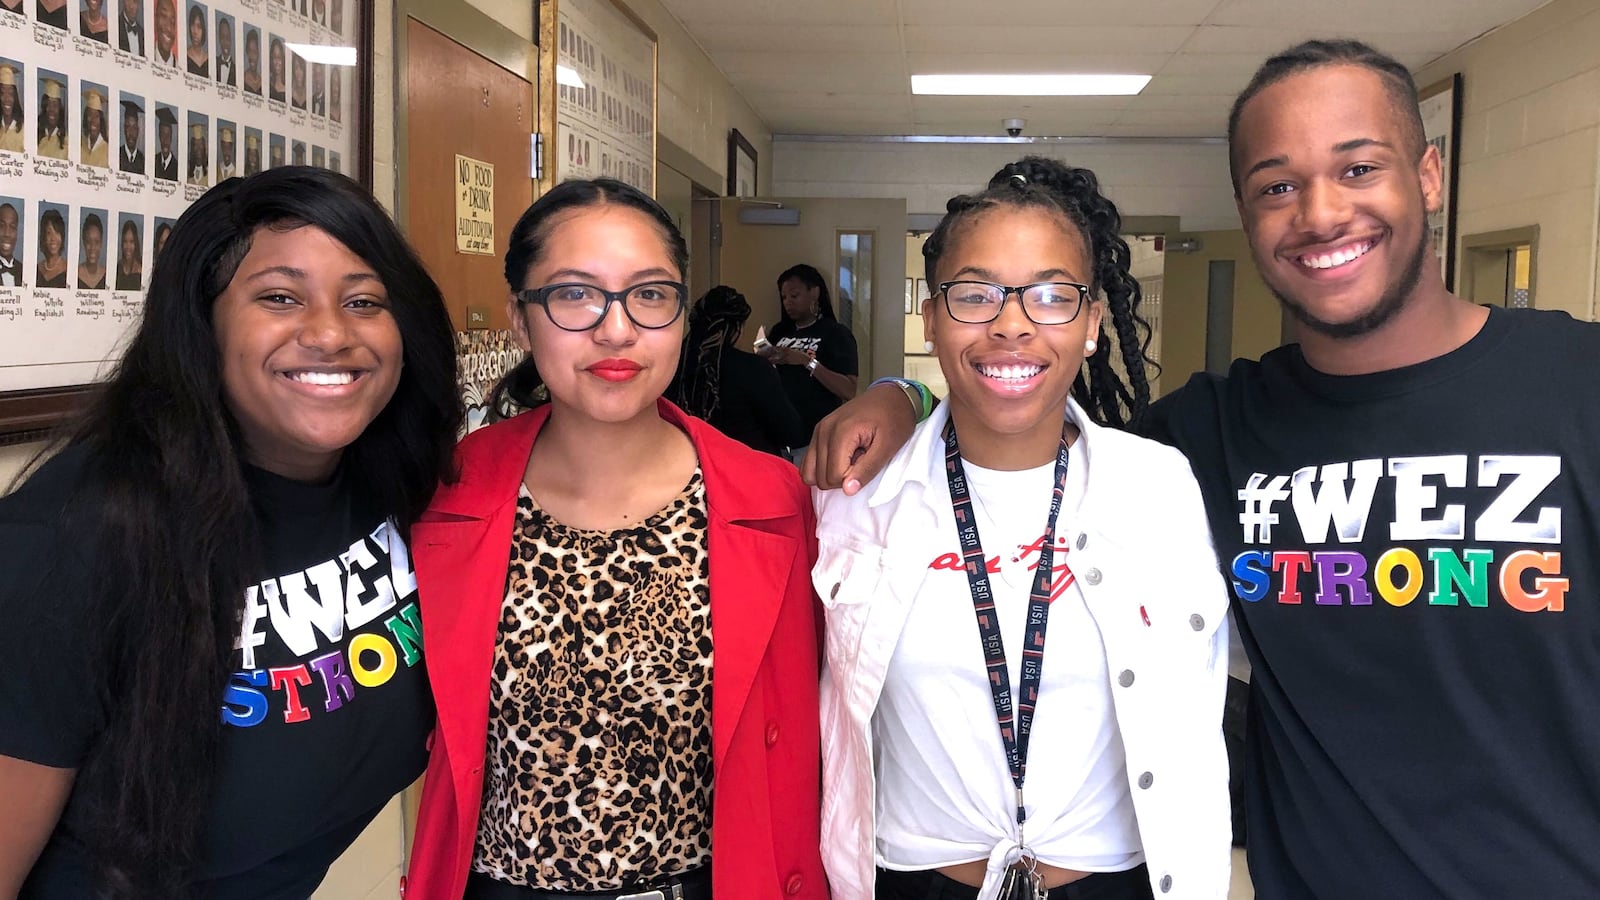 Whitehaven High School students from left, Kanah Myers, Angeles Rosales, Se'Quoia Allmond, and Keith Newsum.